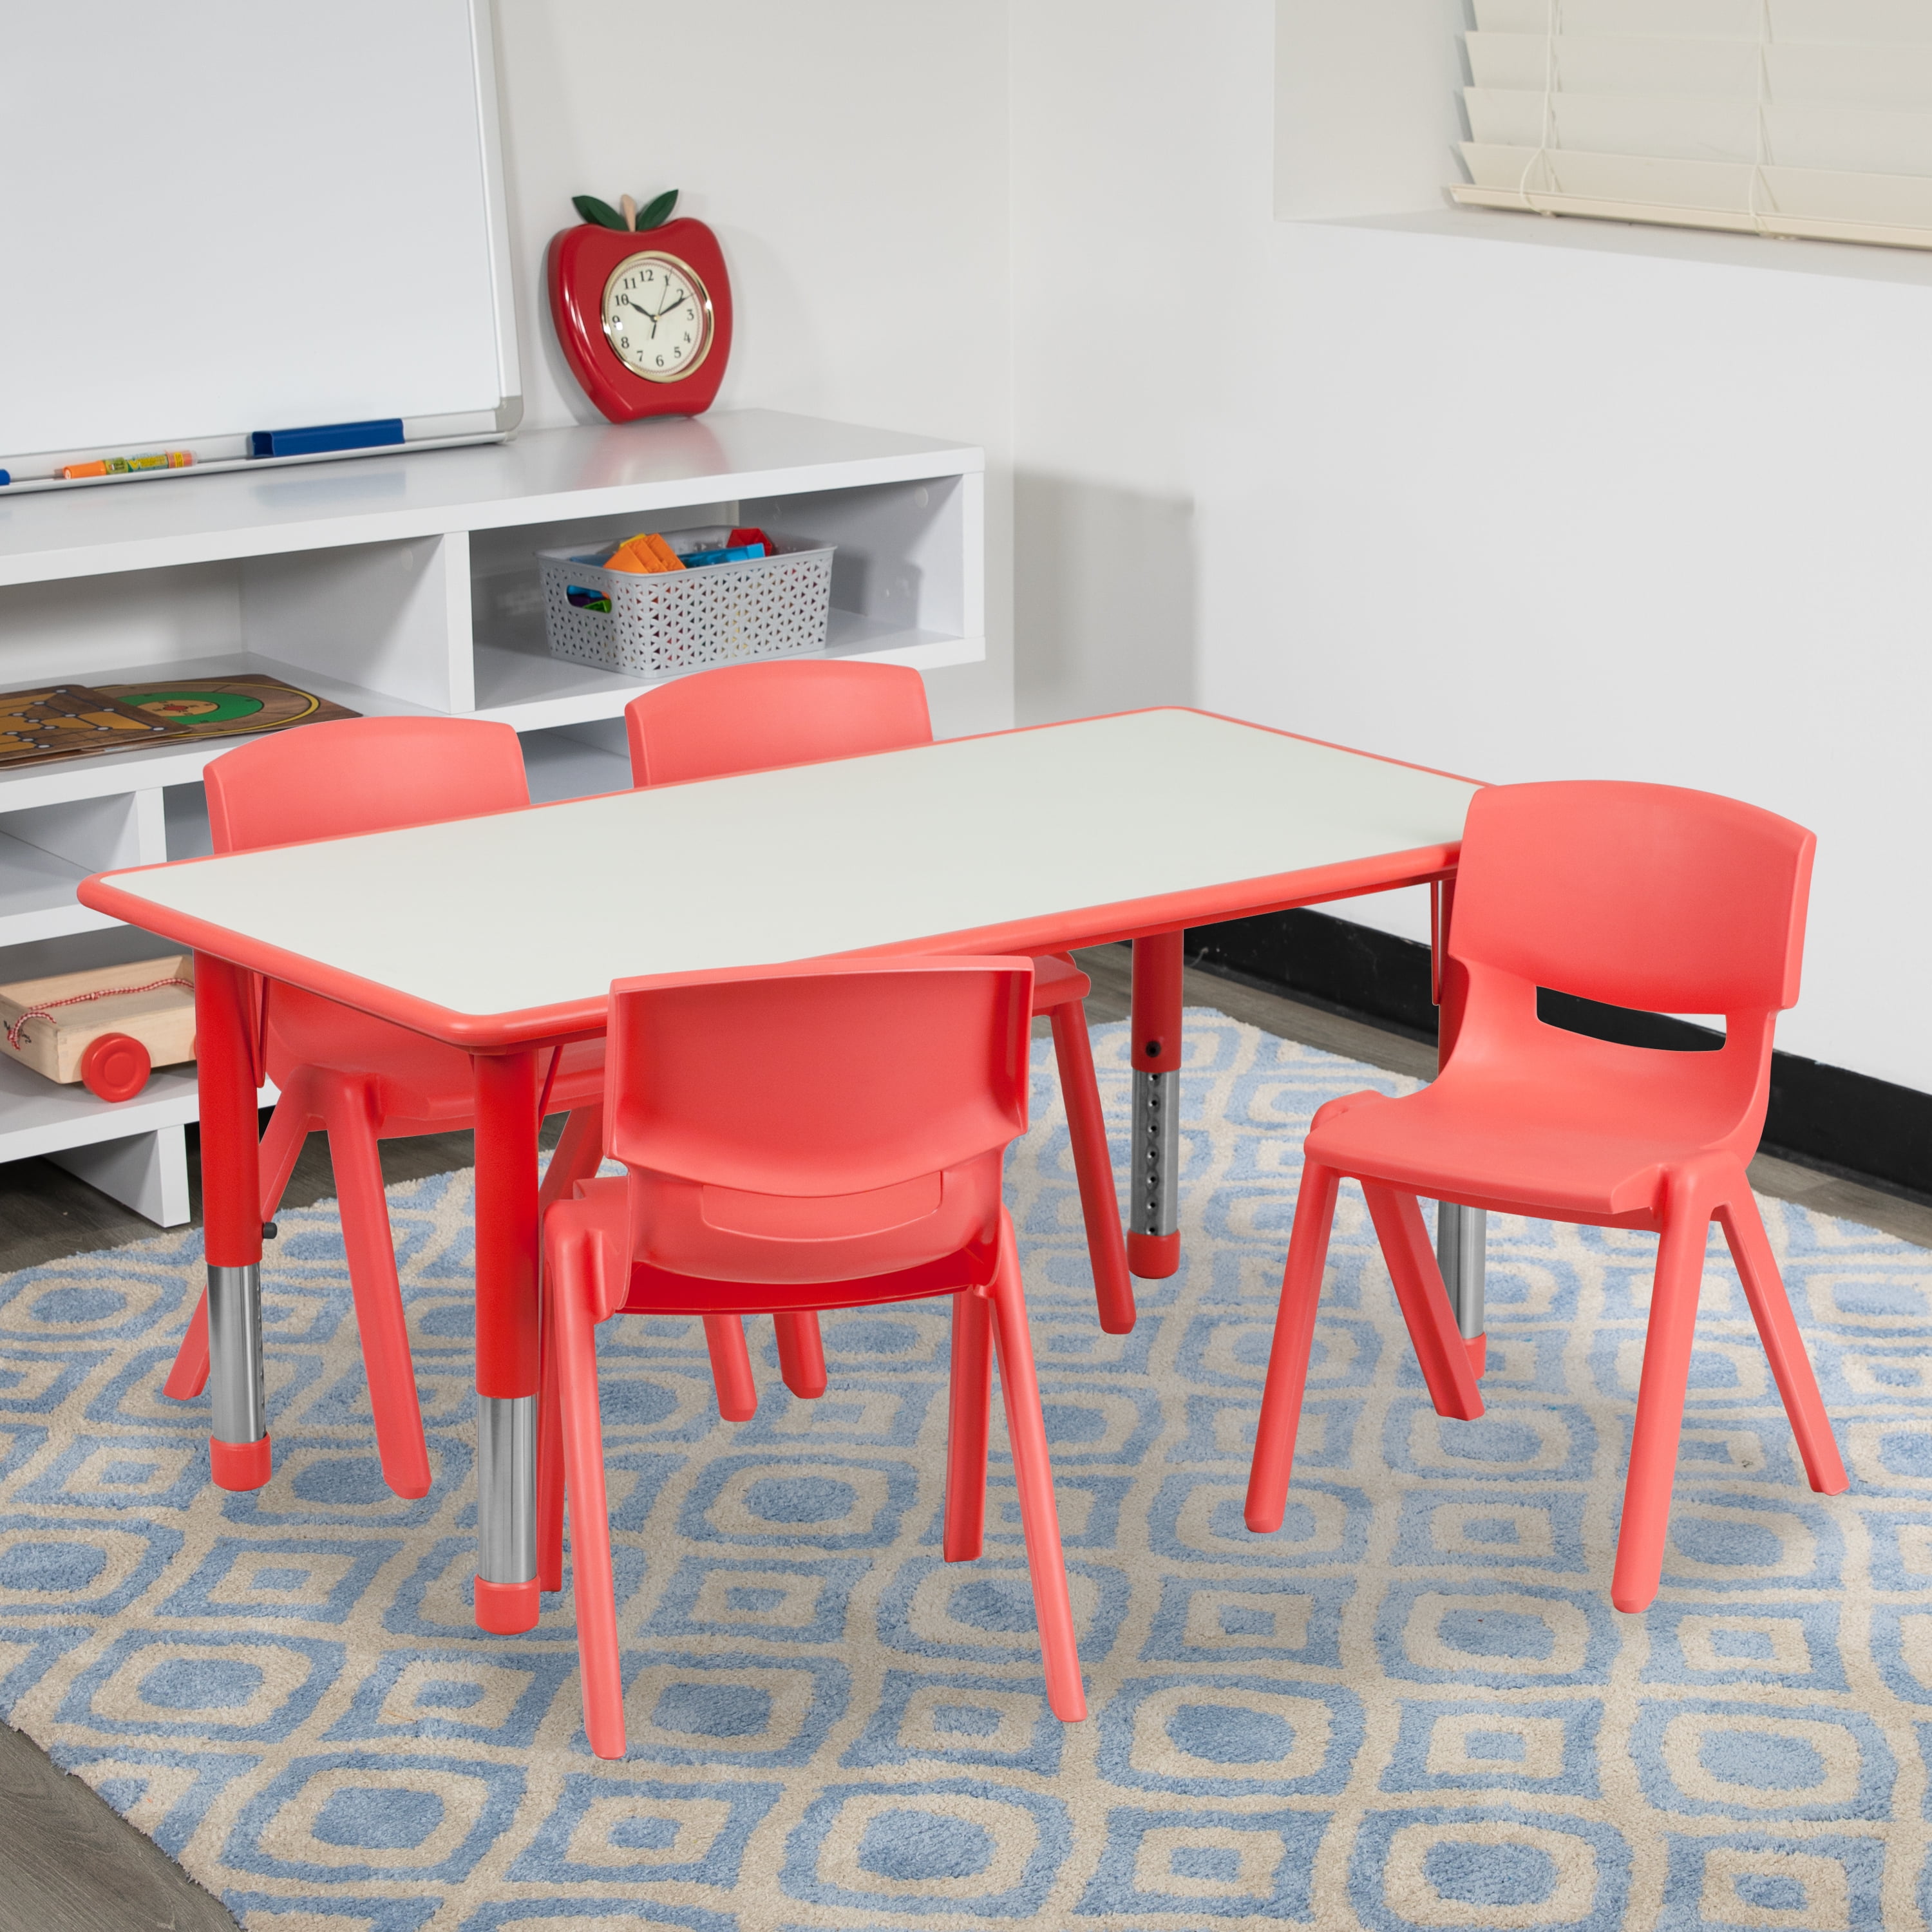 Details about   Kids Table Set with 4 School Stack Chairs Square Adjustable Plastic Activity 